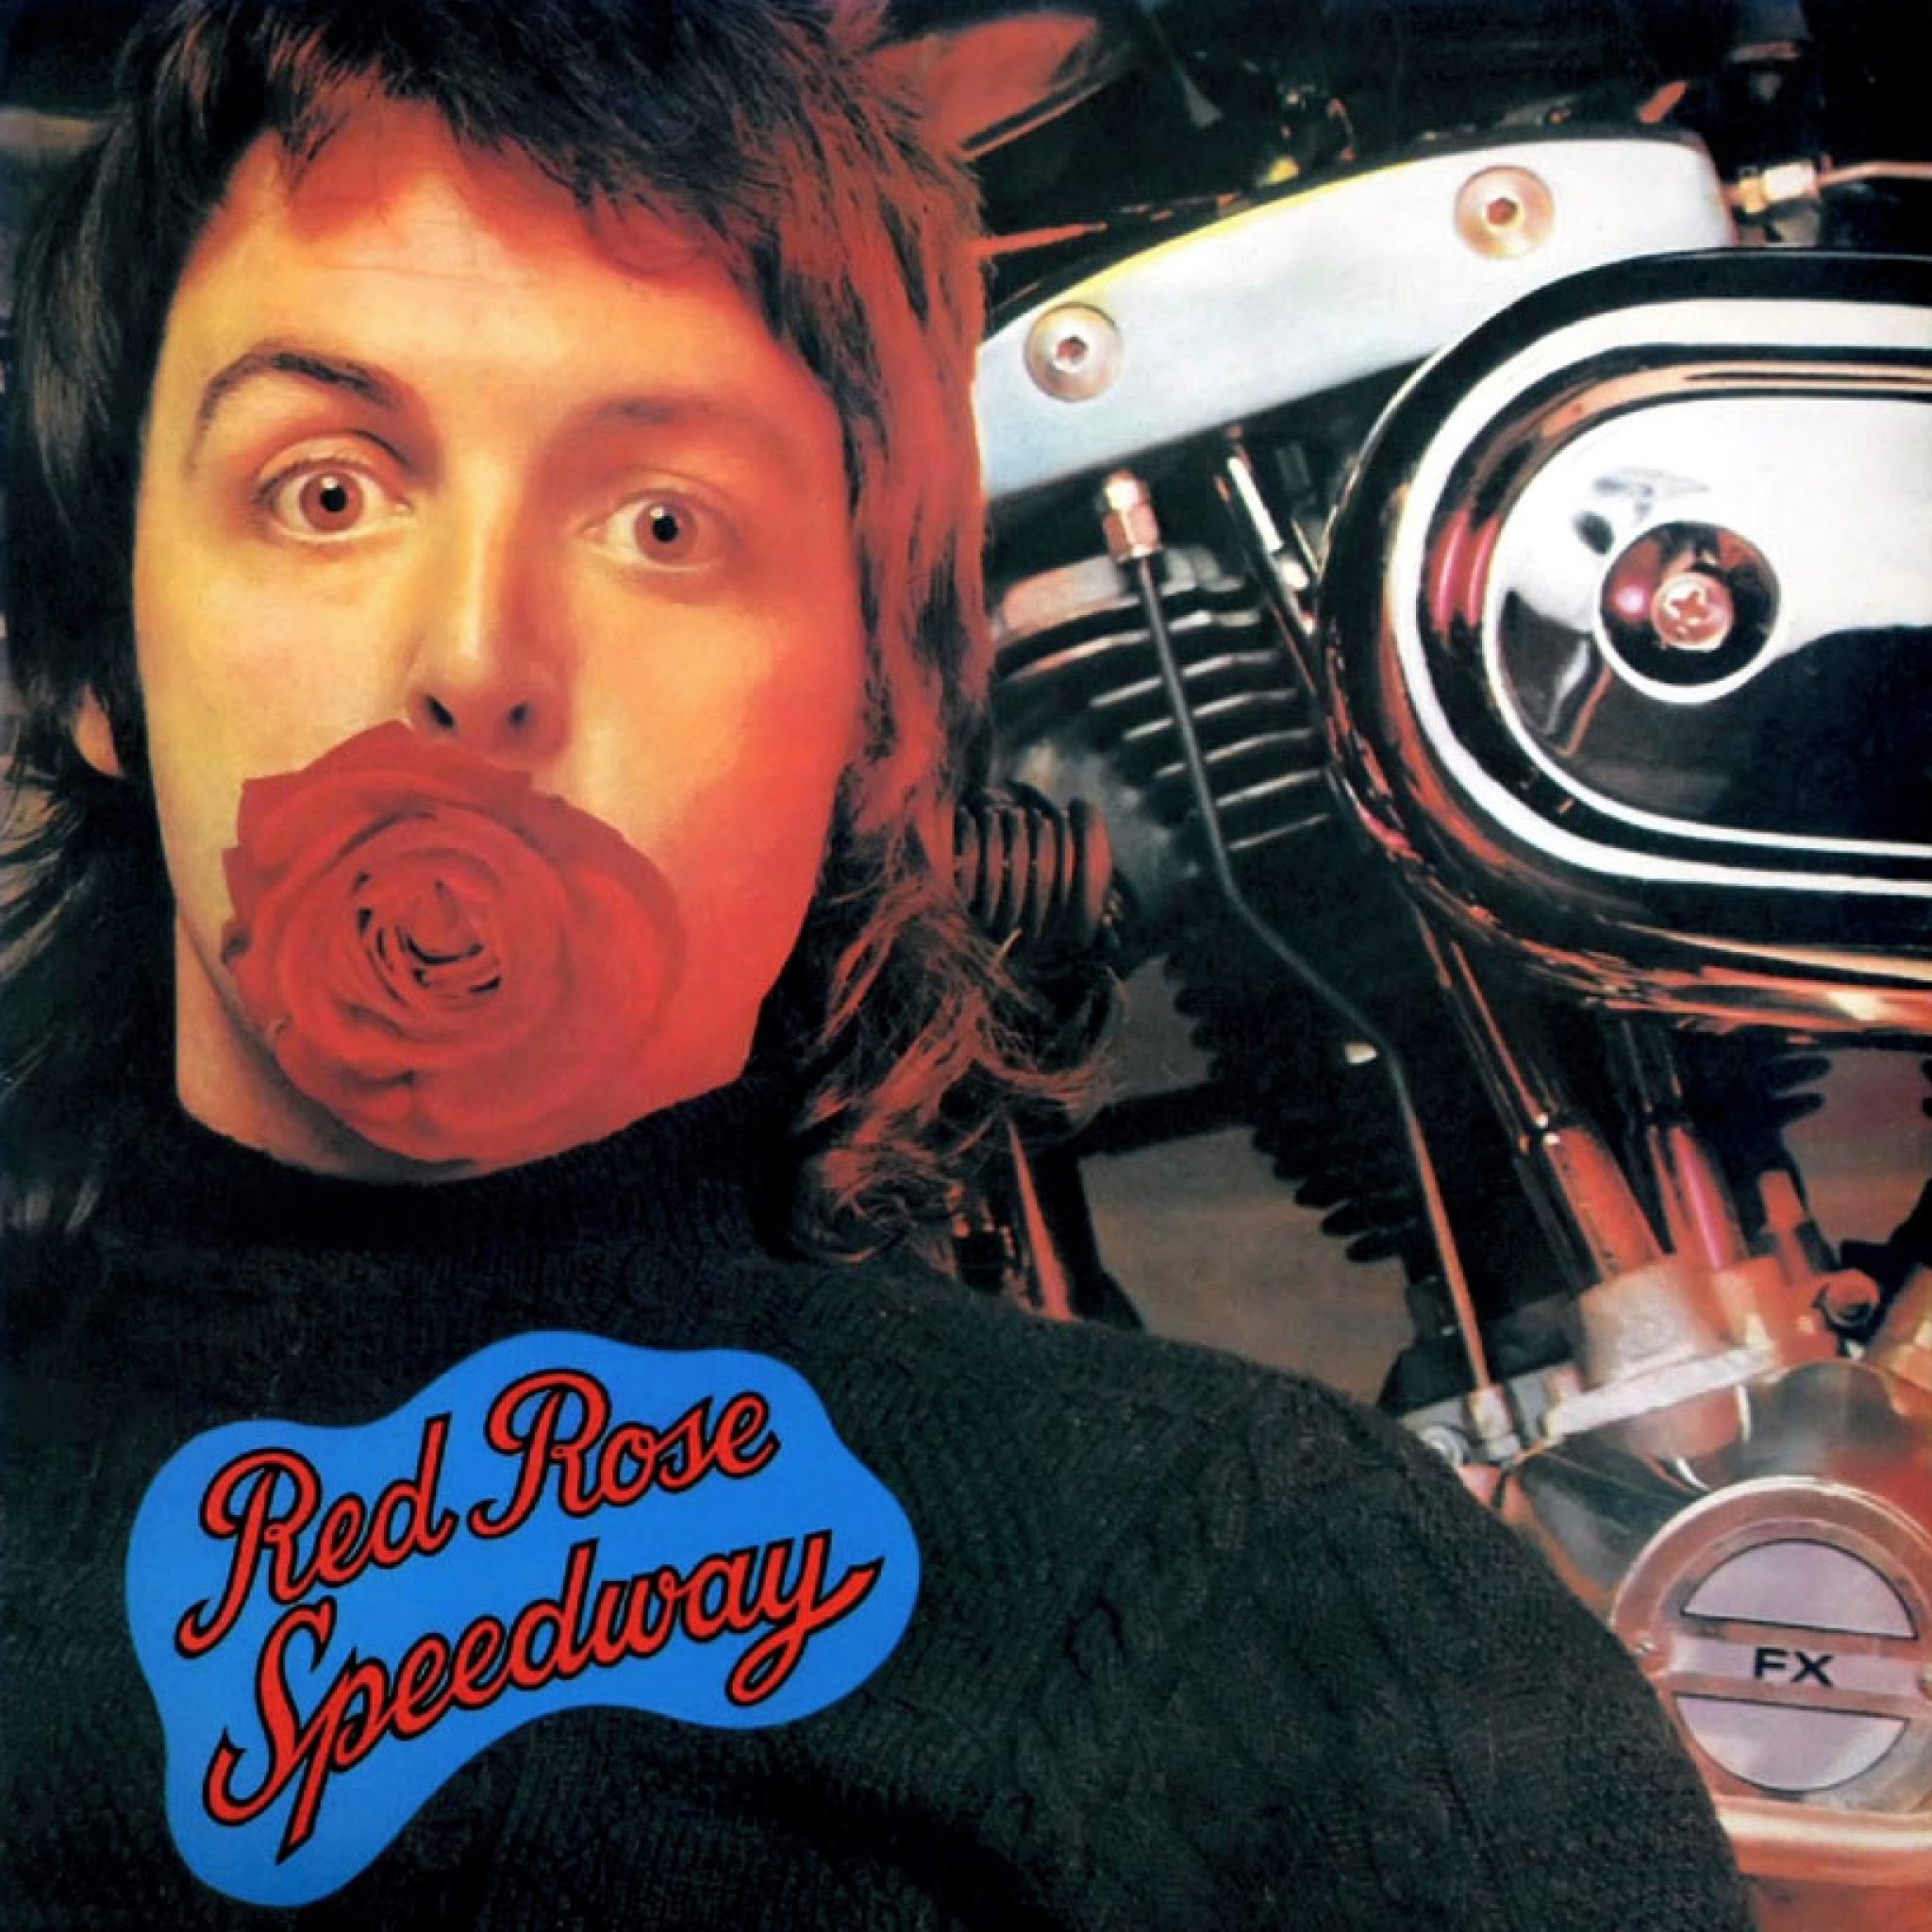 'Red Rose Speedway': Paul McCartney And Wings At Full Throttle